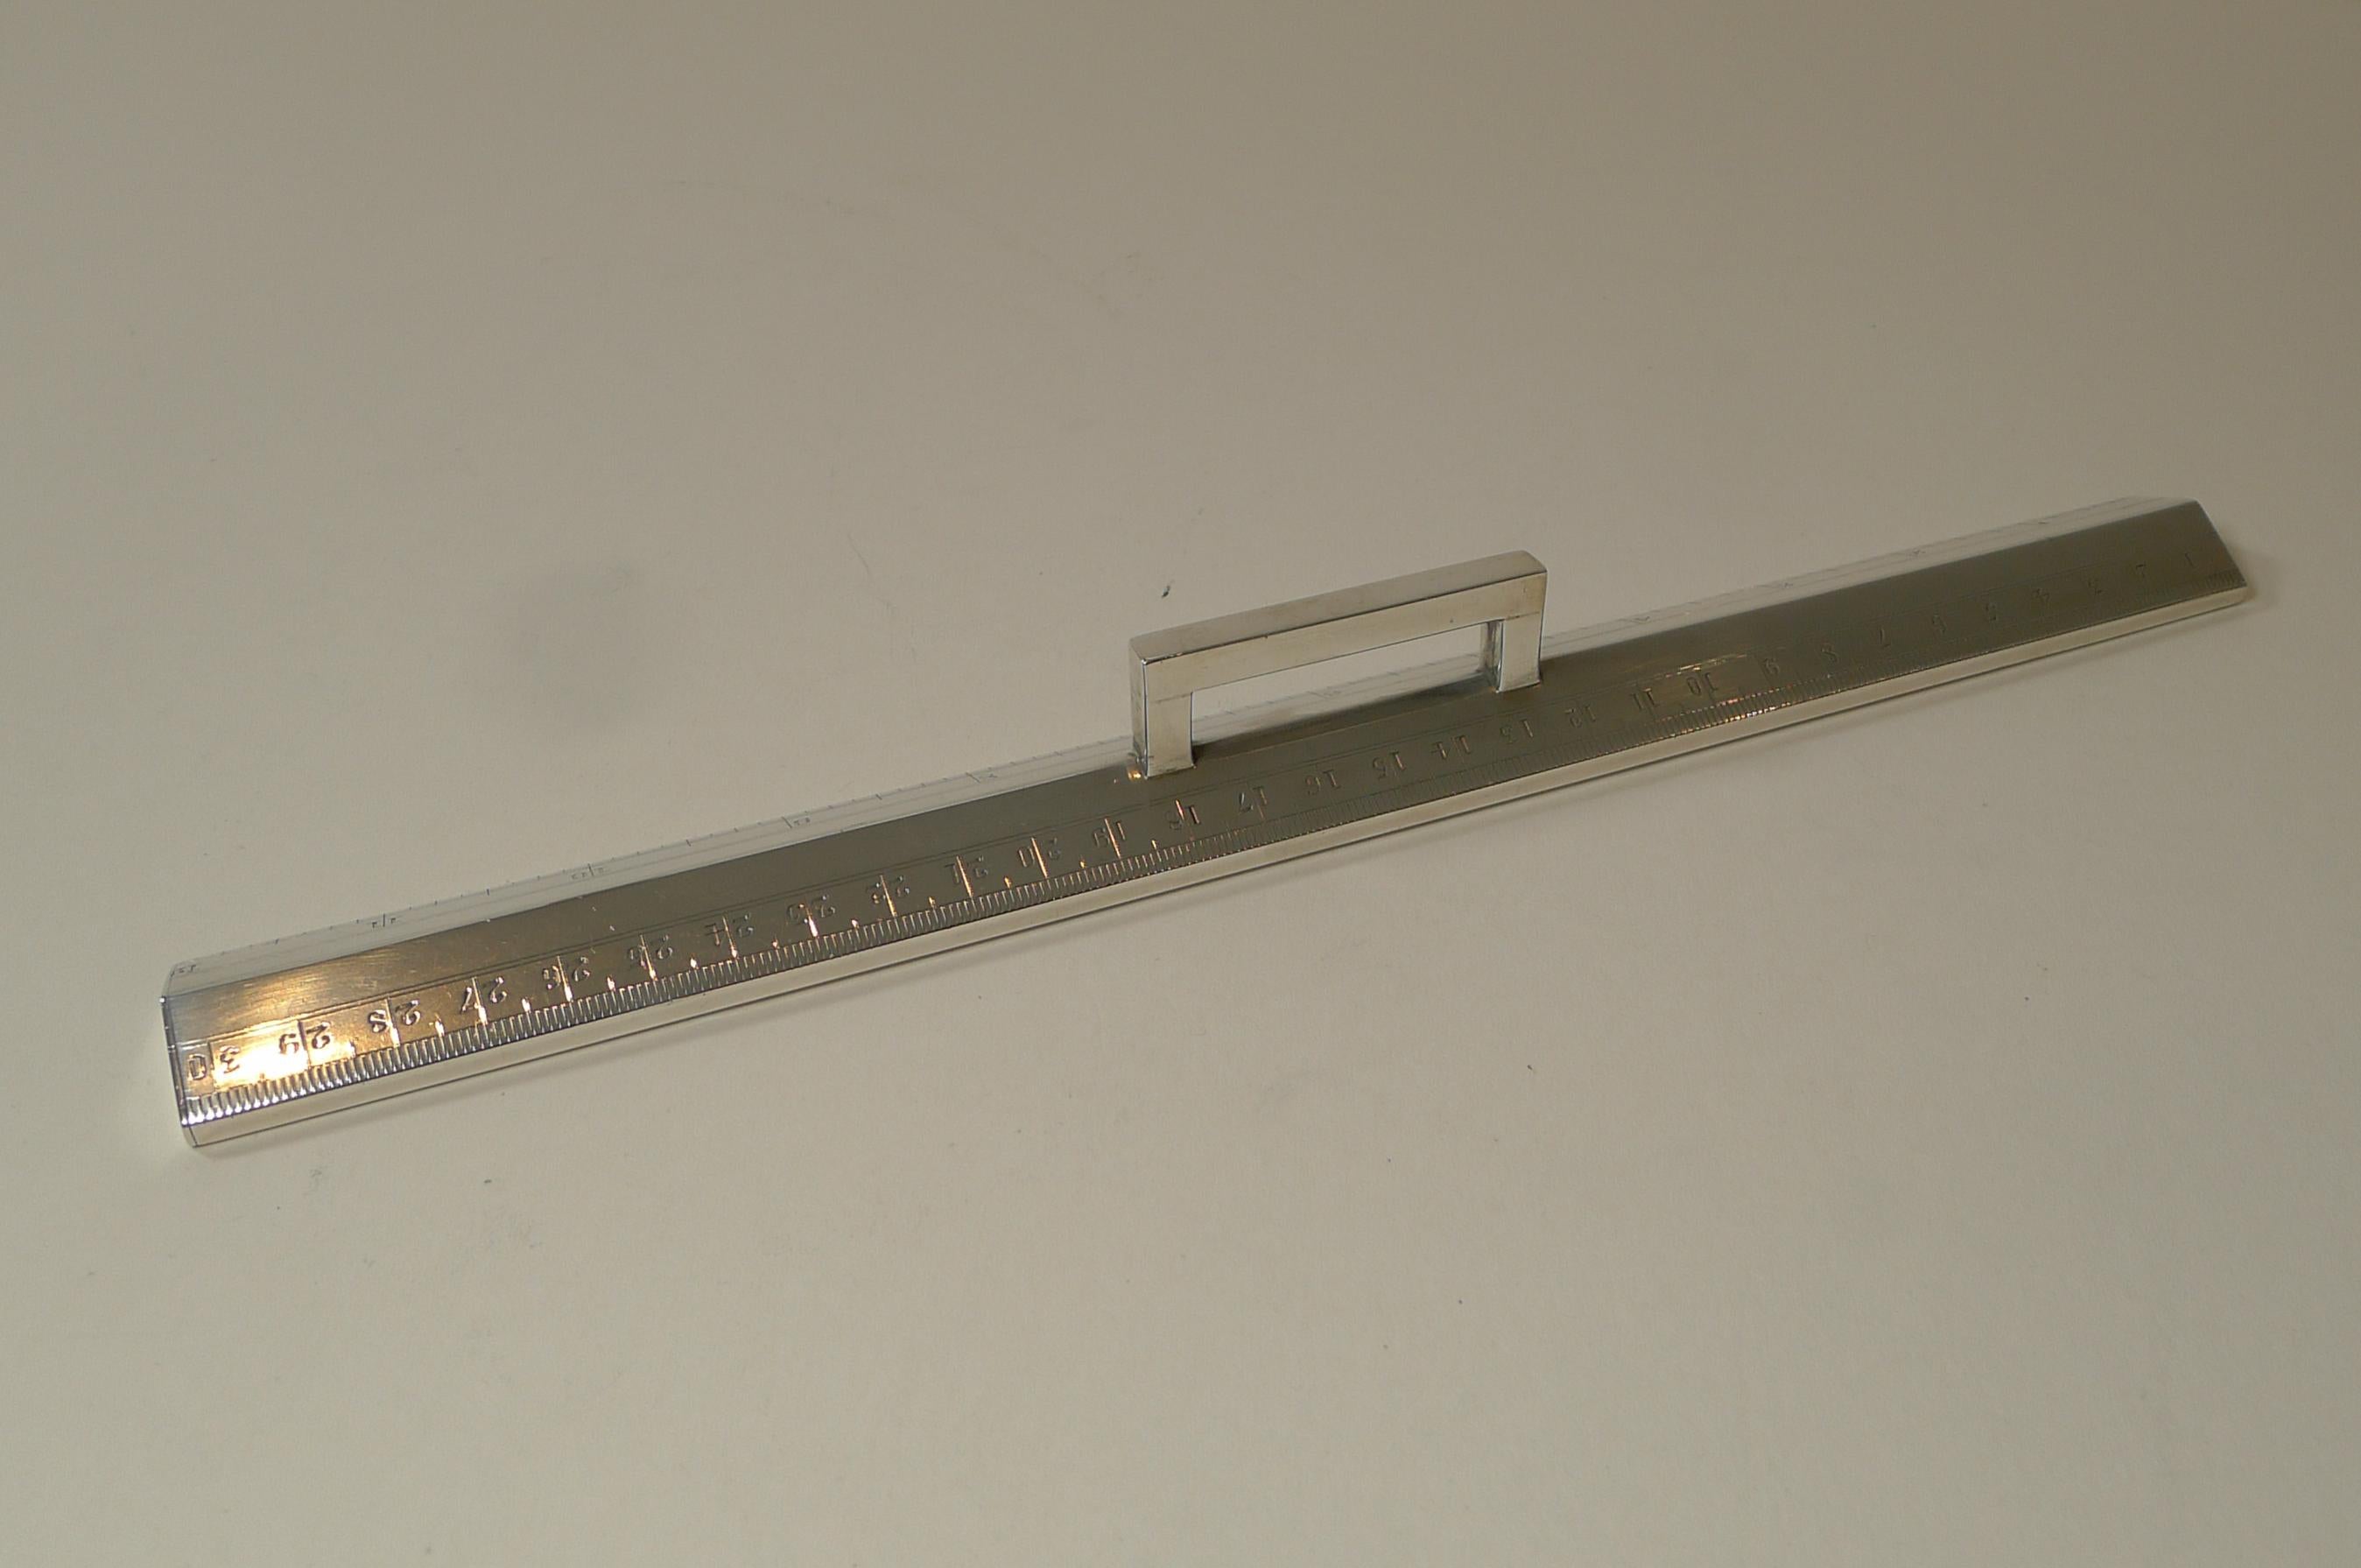 A magnificent and rare hefty desk-top ruler by one of the creme de la creme of silversmith's, John Collard Vickery.

The numbers are crisp, the hallmark and English design registration number are clear and the ruler is without knocks, damage or